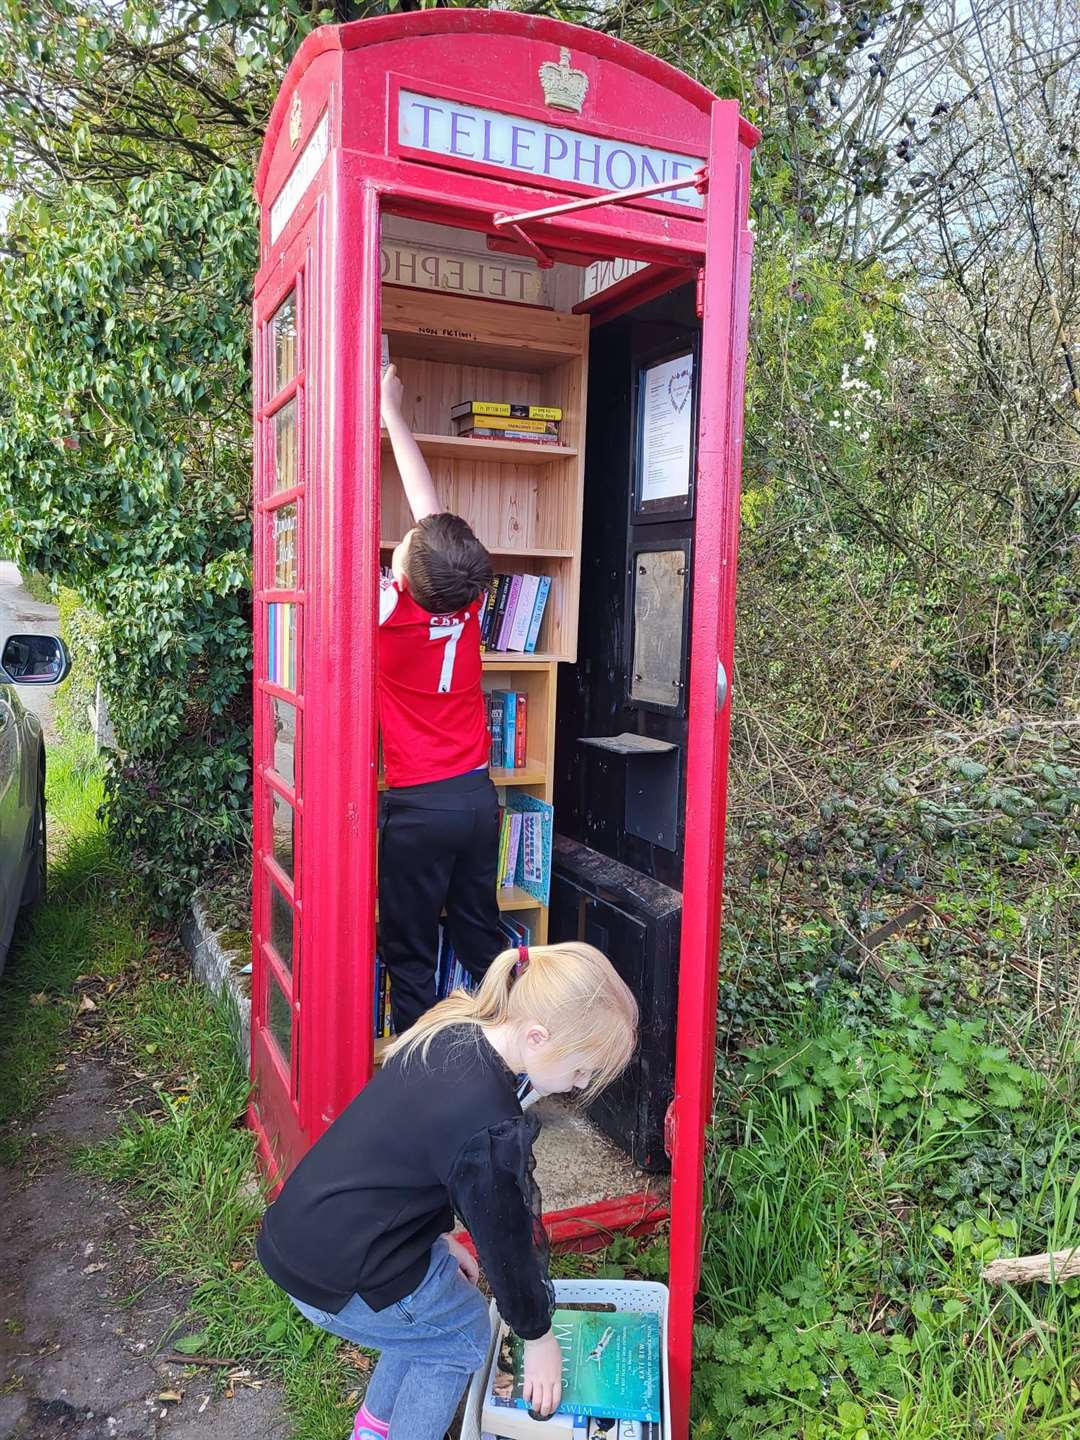 Ms Connolly’s two younger children helping to add books to shelves in the telephone box library (Iona Connolly/PA)